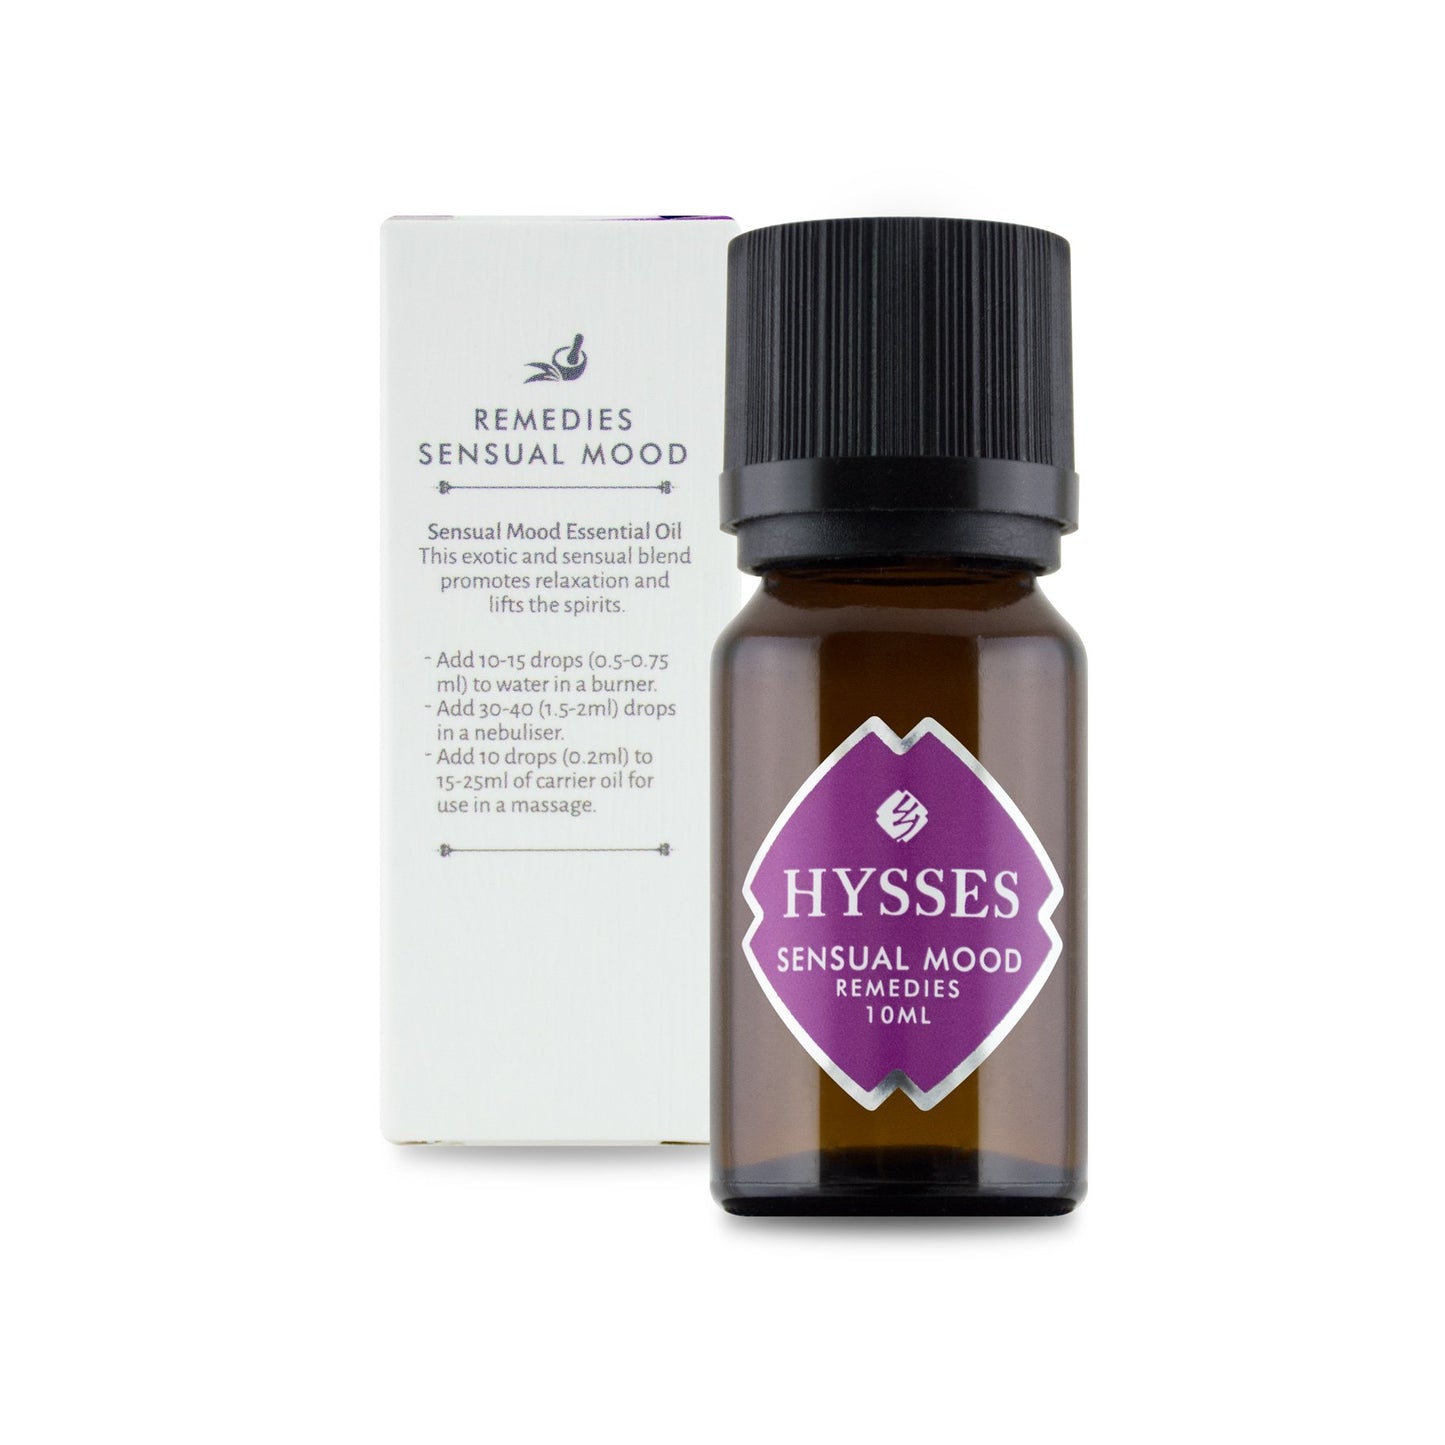 Hysses Essential Oils, Remedies Collection 10ml - Sensual Mood